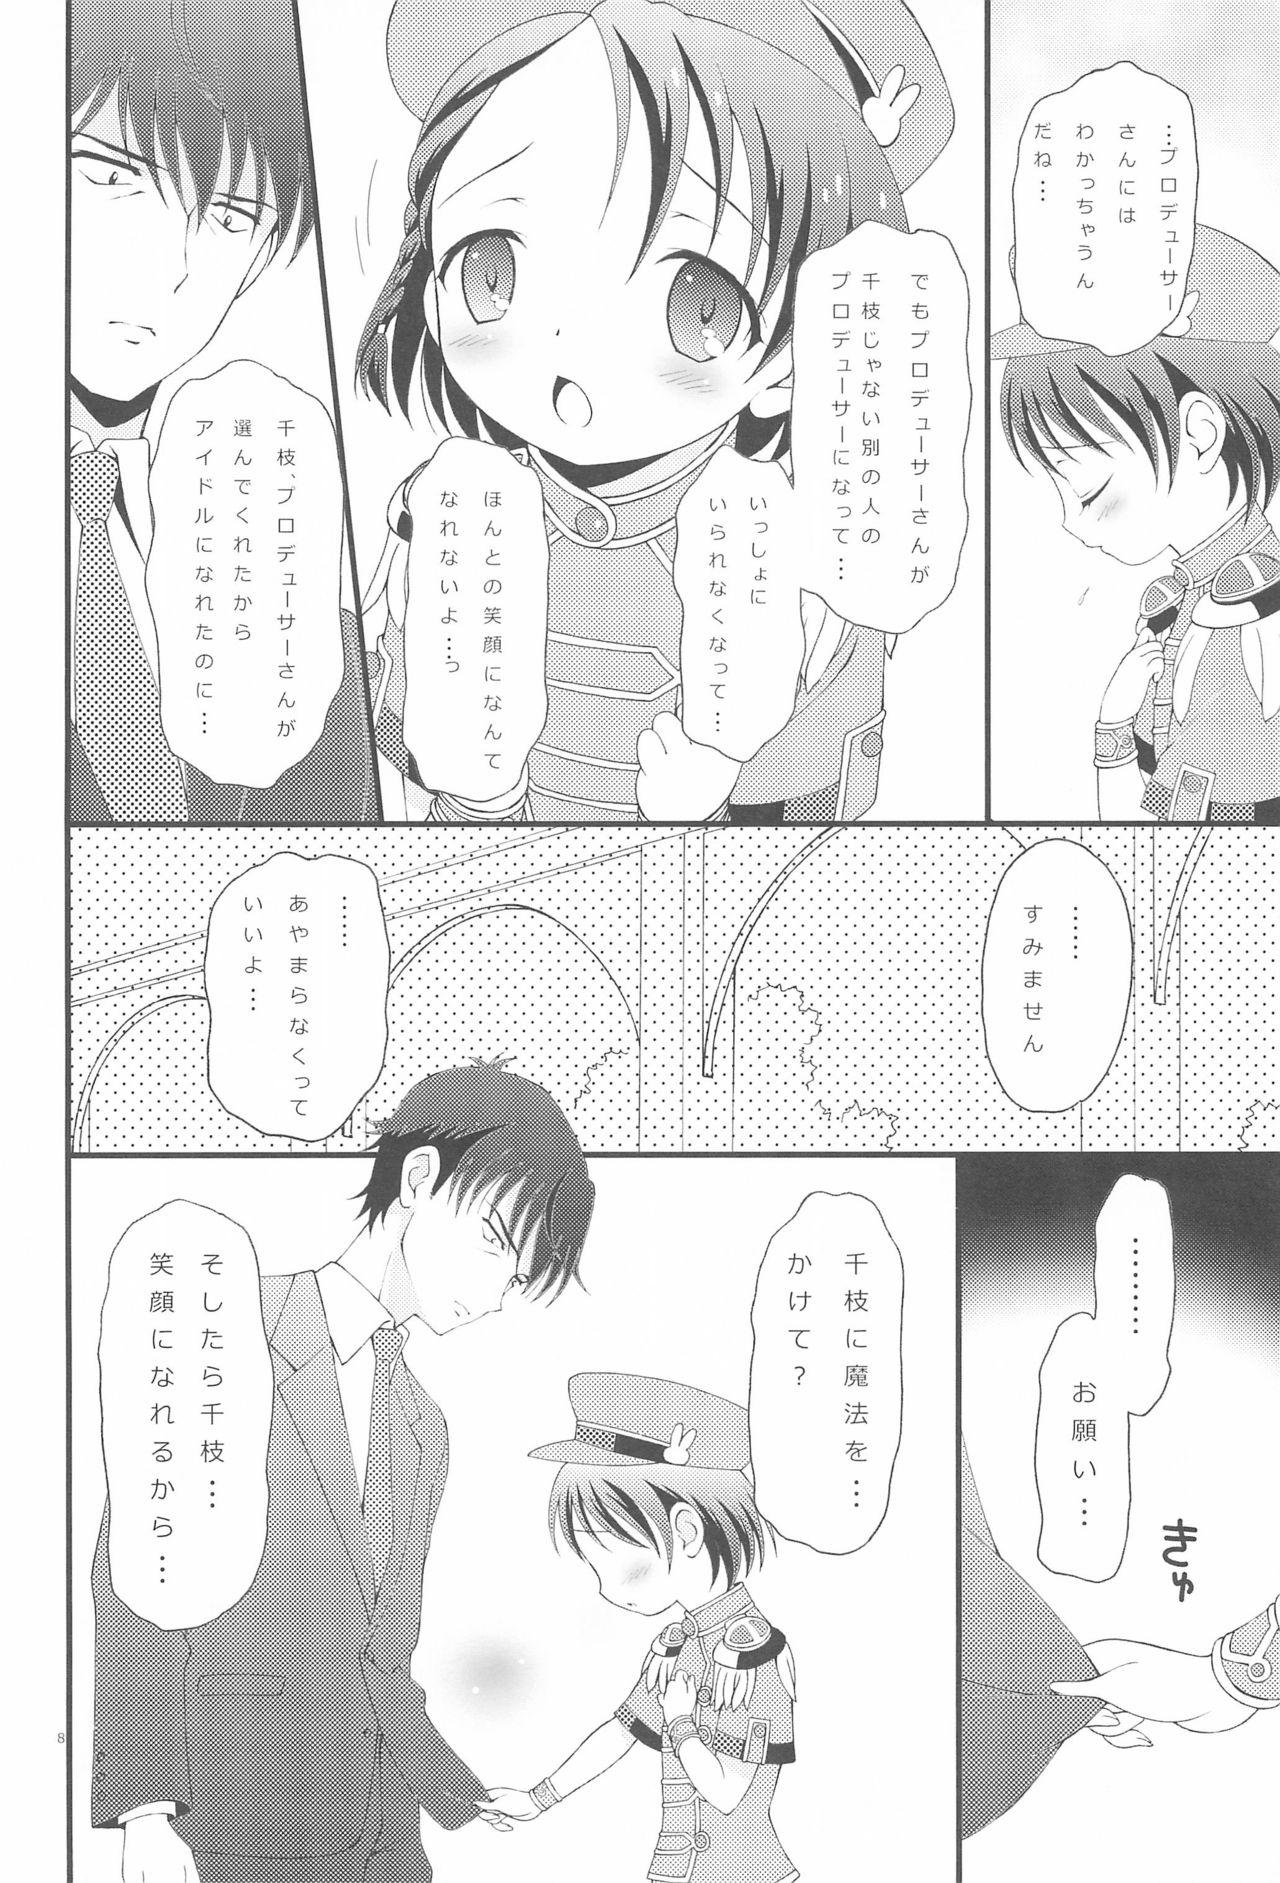 Toilet iXam@s+1 - The idolmaster Super - Page 8